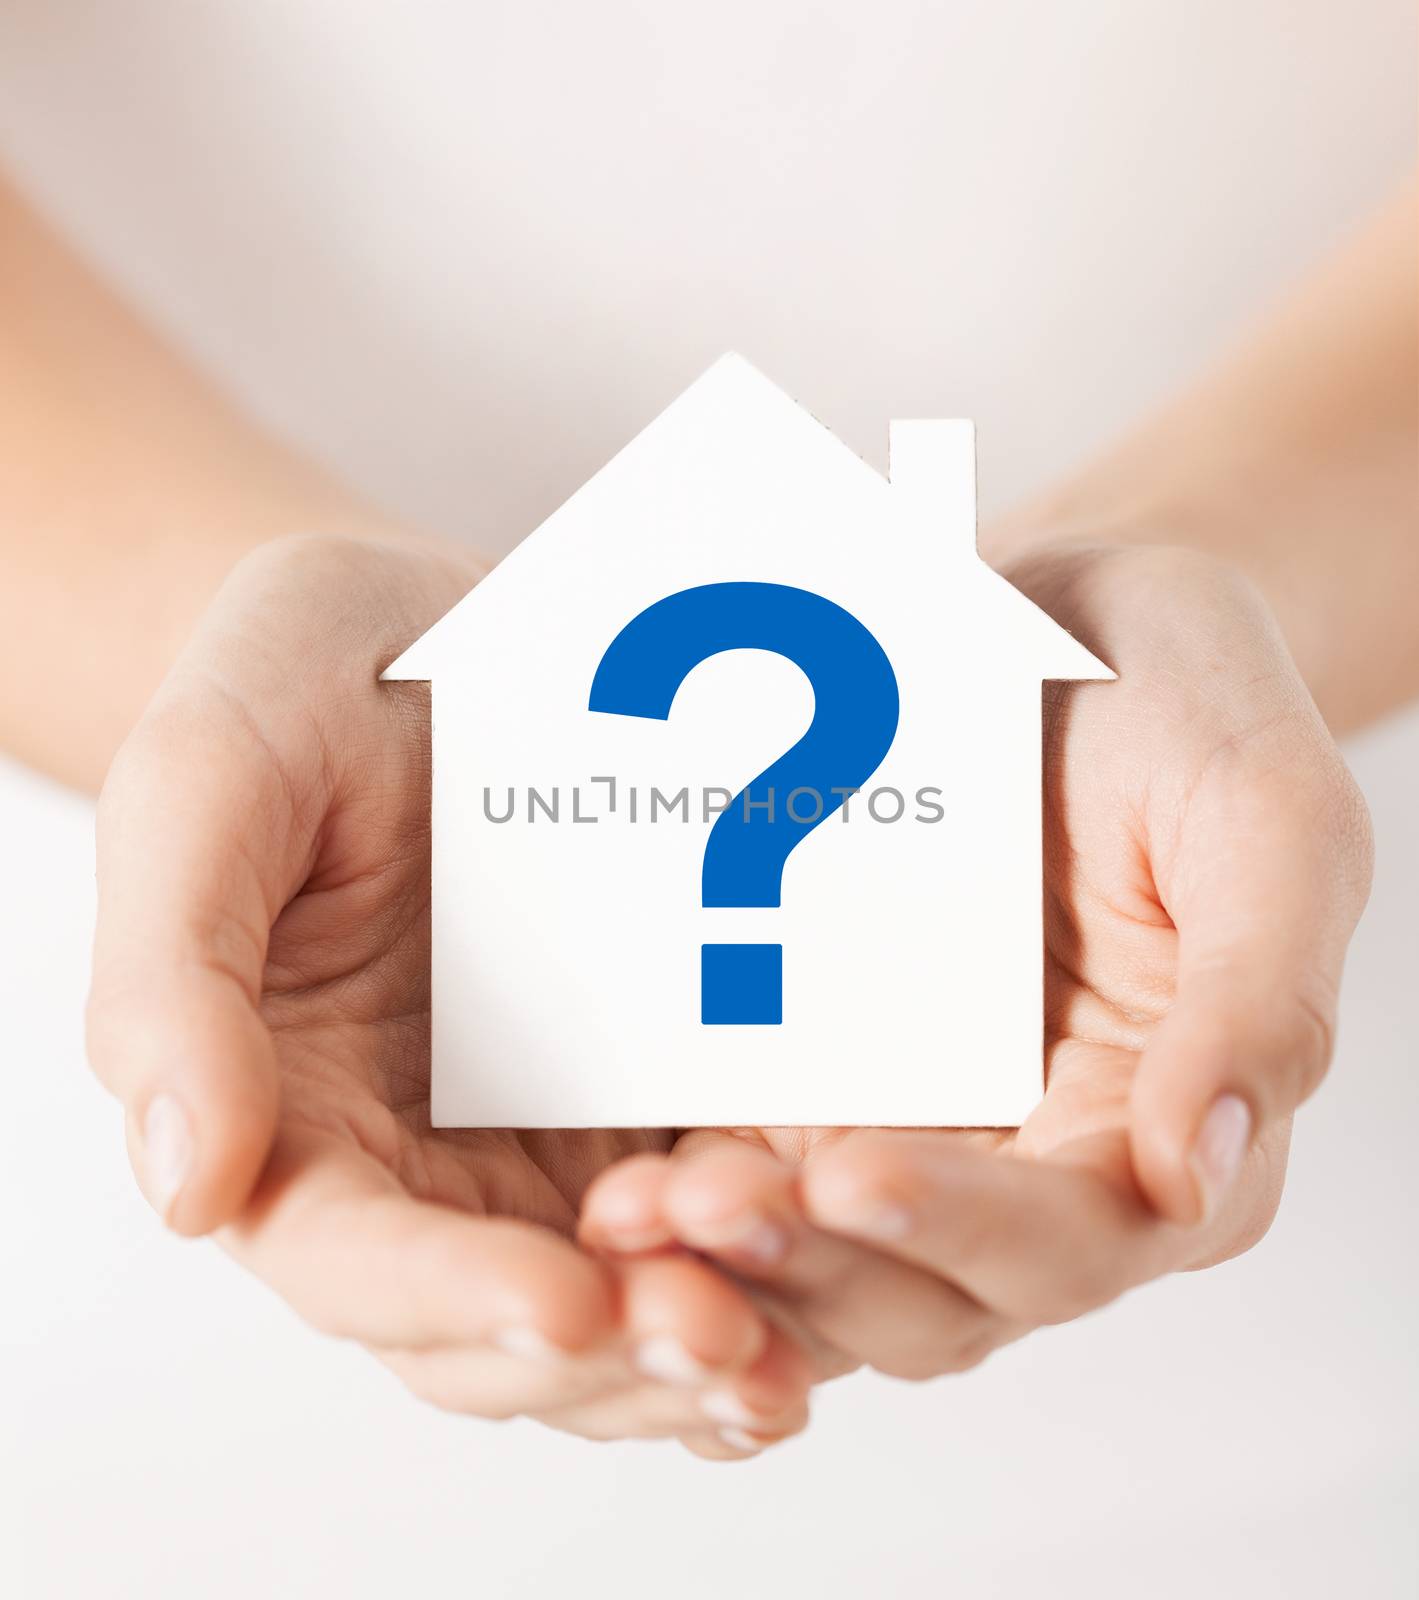 real estate and family home concept - hands holding paper house with question mark